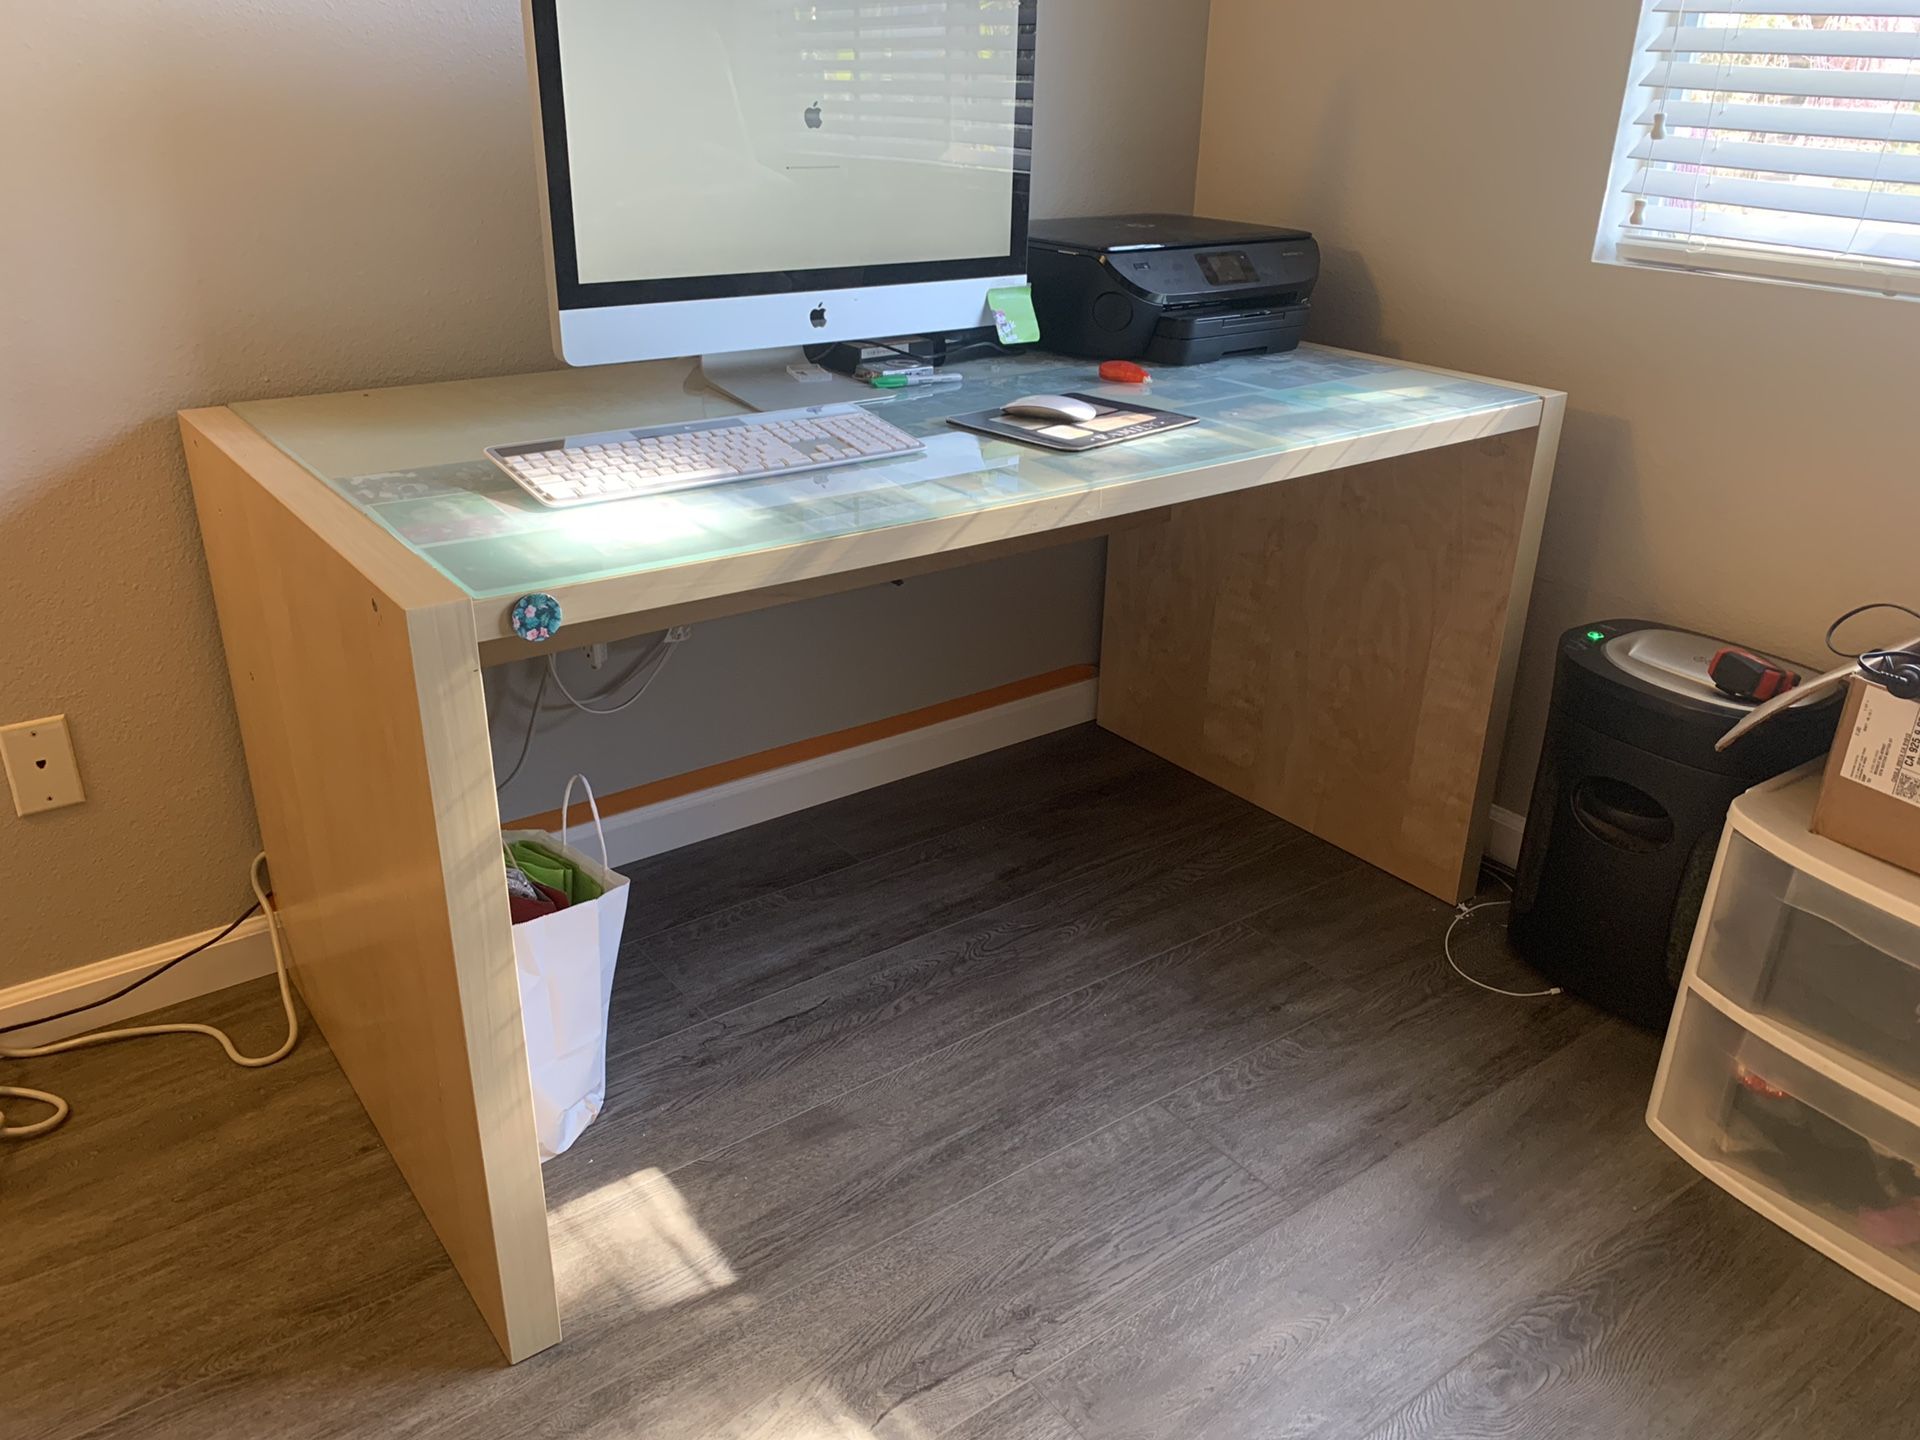 IKEA office desk with glass top